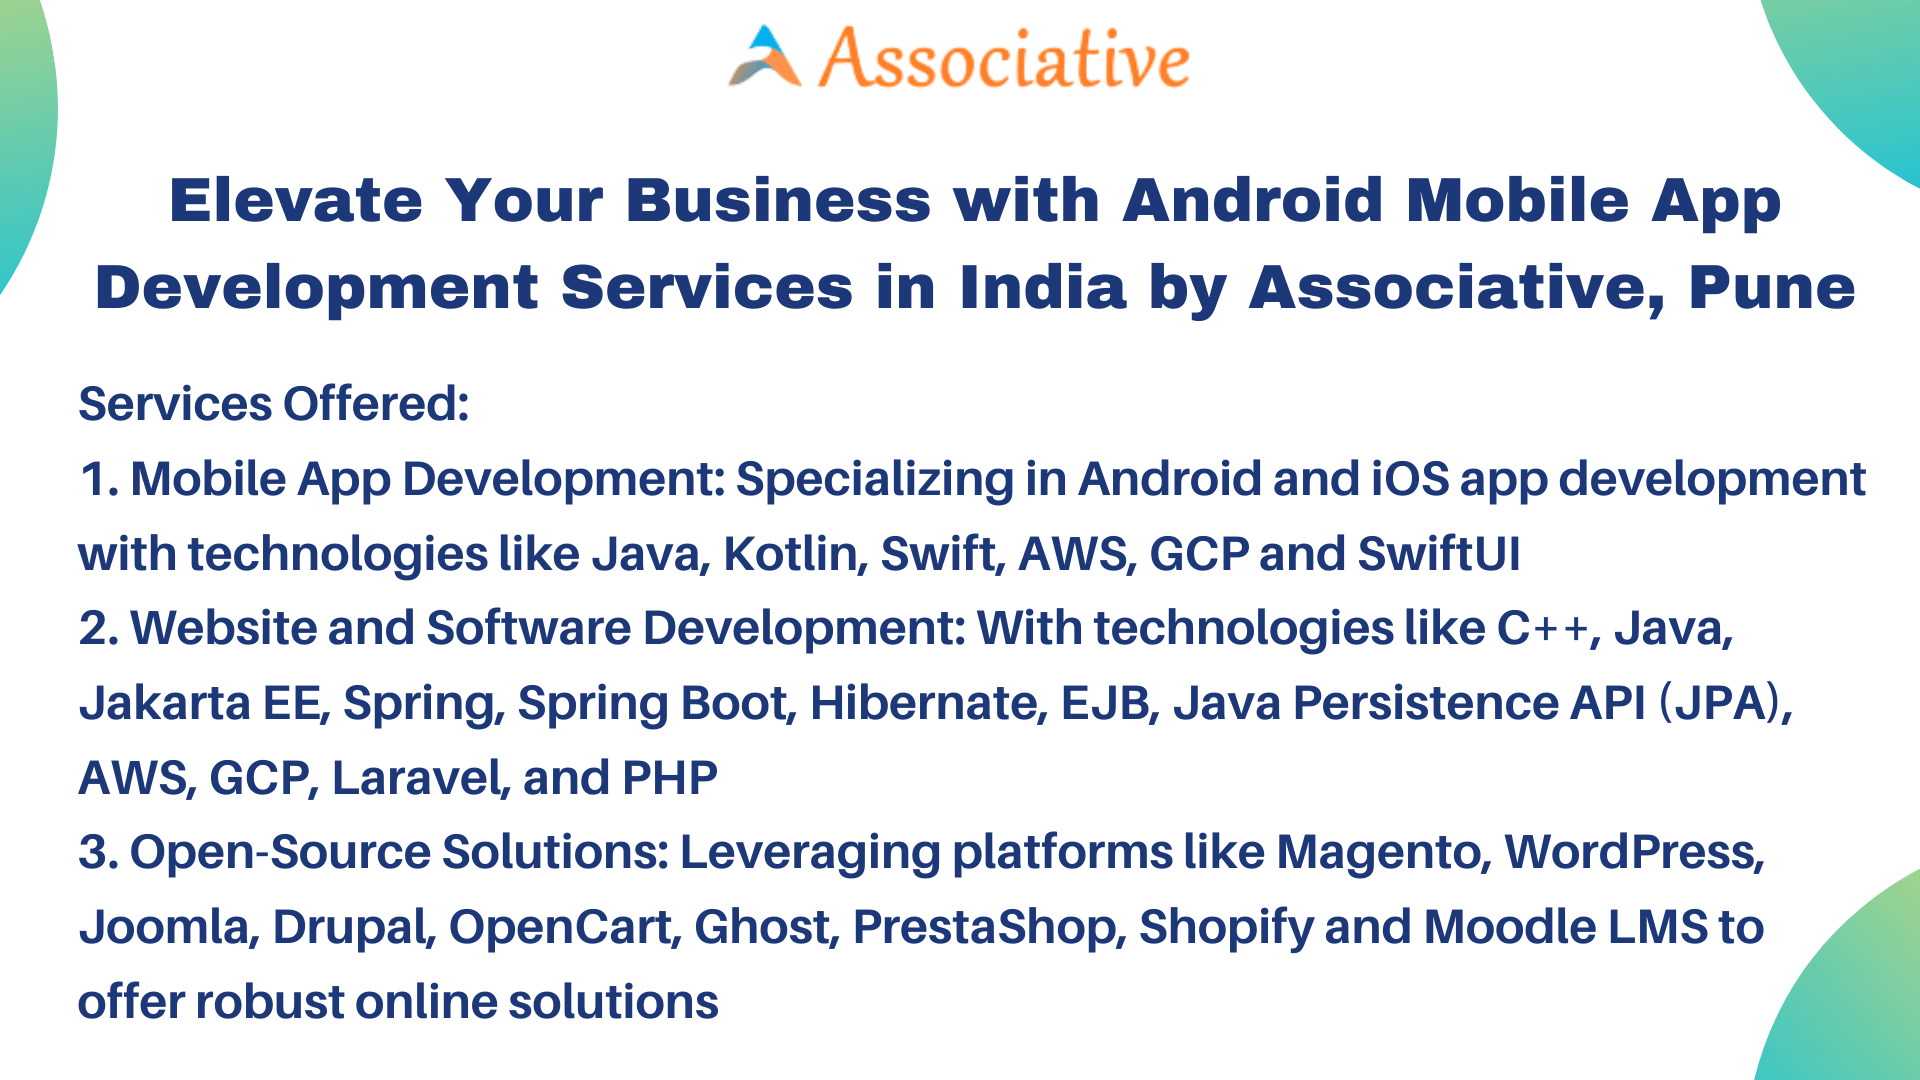 Elevate Your Business with Android Mobile App Development Services in India by Associative, Pune